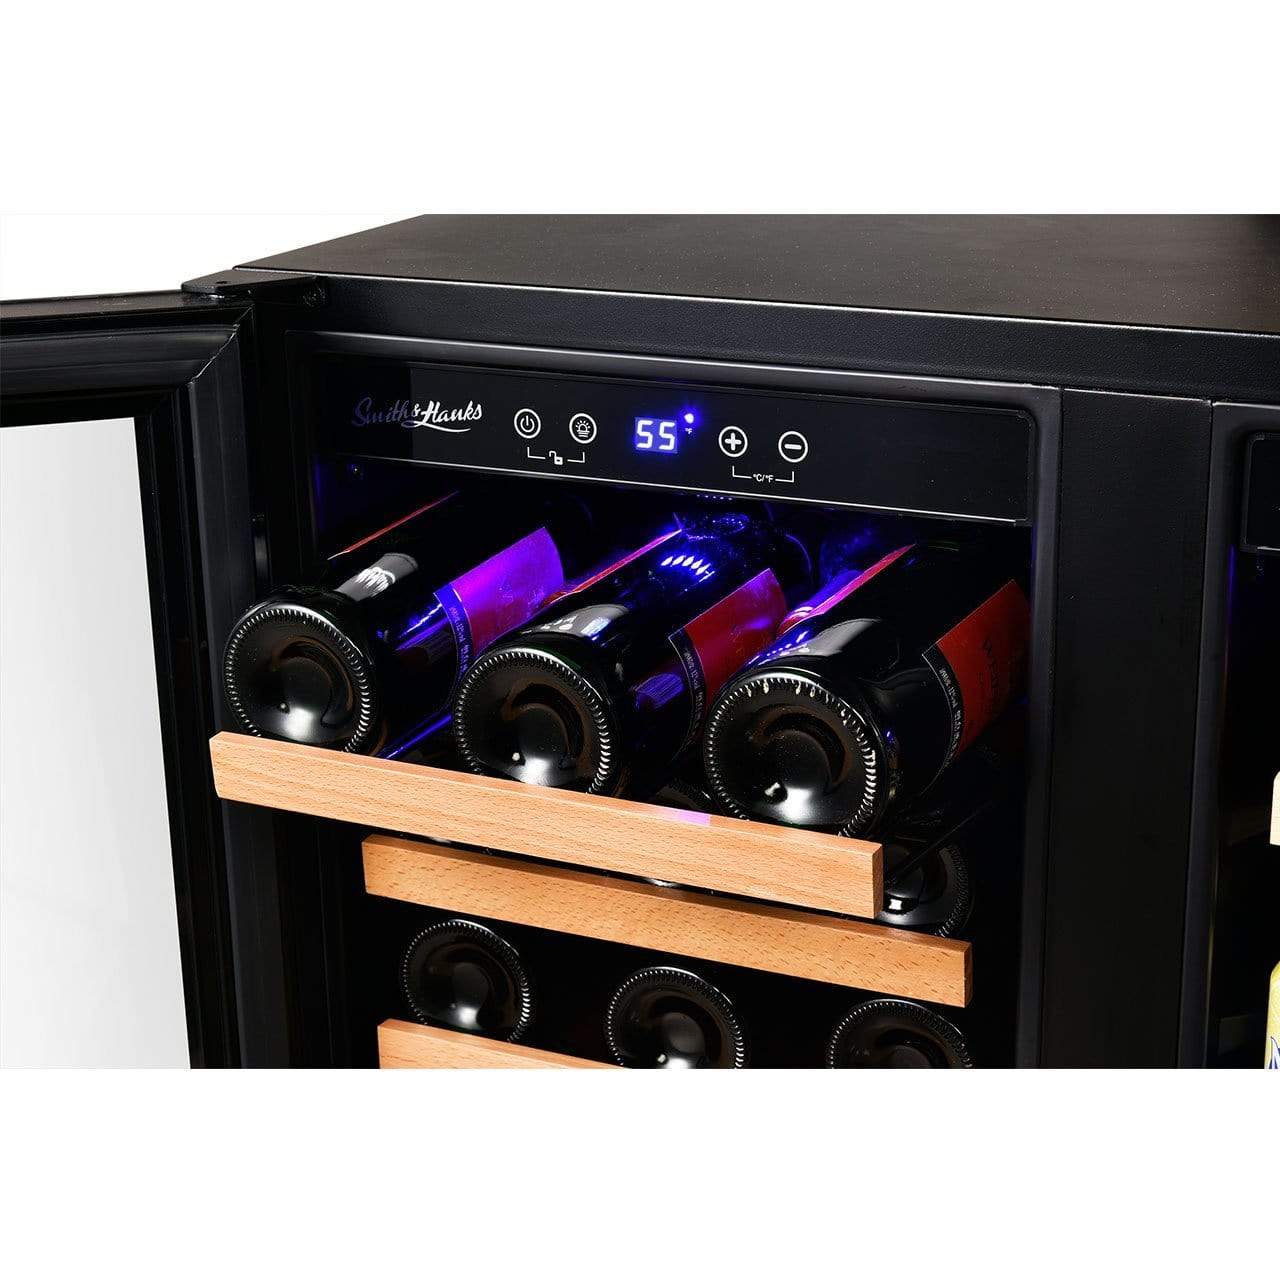 Smith & Hanks Stainless Steel Wine and Beverage Fridge BEV176SD Wine/Beverage Coolers Combo BEV176SD Luxury Appliances Direct